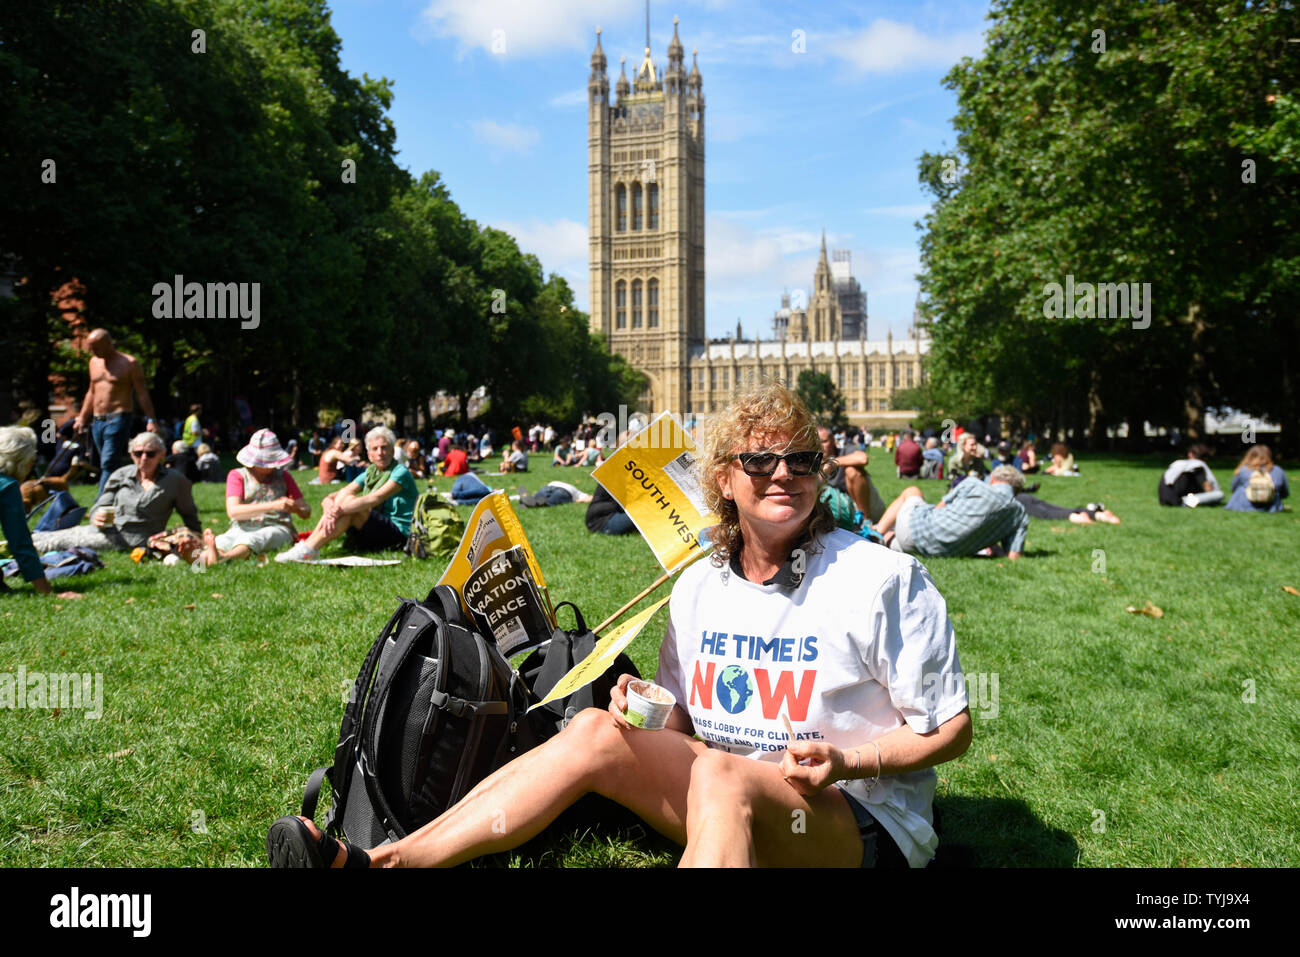 London, UK.  26 June 2019.   Kate Bone from Cornwall Wildlife Trust joins people in a 'Time Is Now' mass lobby around Parliament.  Activists are attempting to deliver a message to MPs that to tackle the environmental crisis, a strong Environment Bill is passed that can restore nature, cut plastic pollution and improve air quality.  Similar gatherings are taking place across the UK.  Credit: Stephen Chung / Alamy Live News Stock Photo